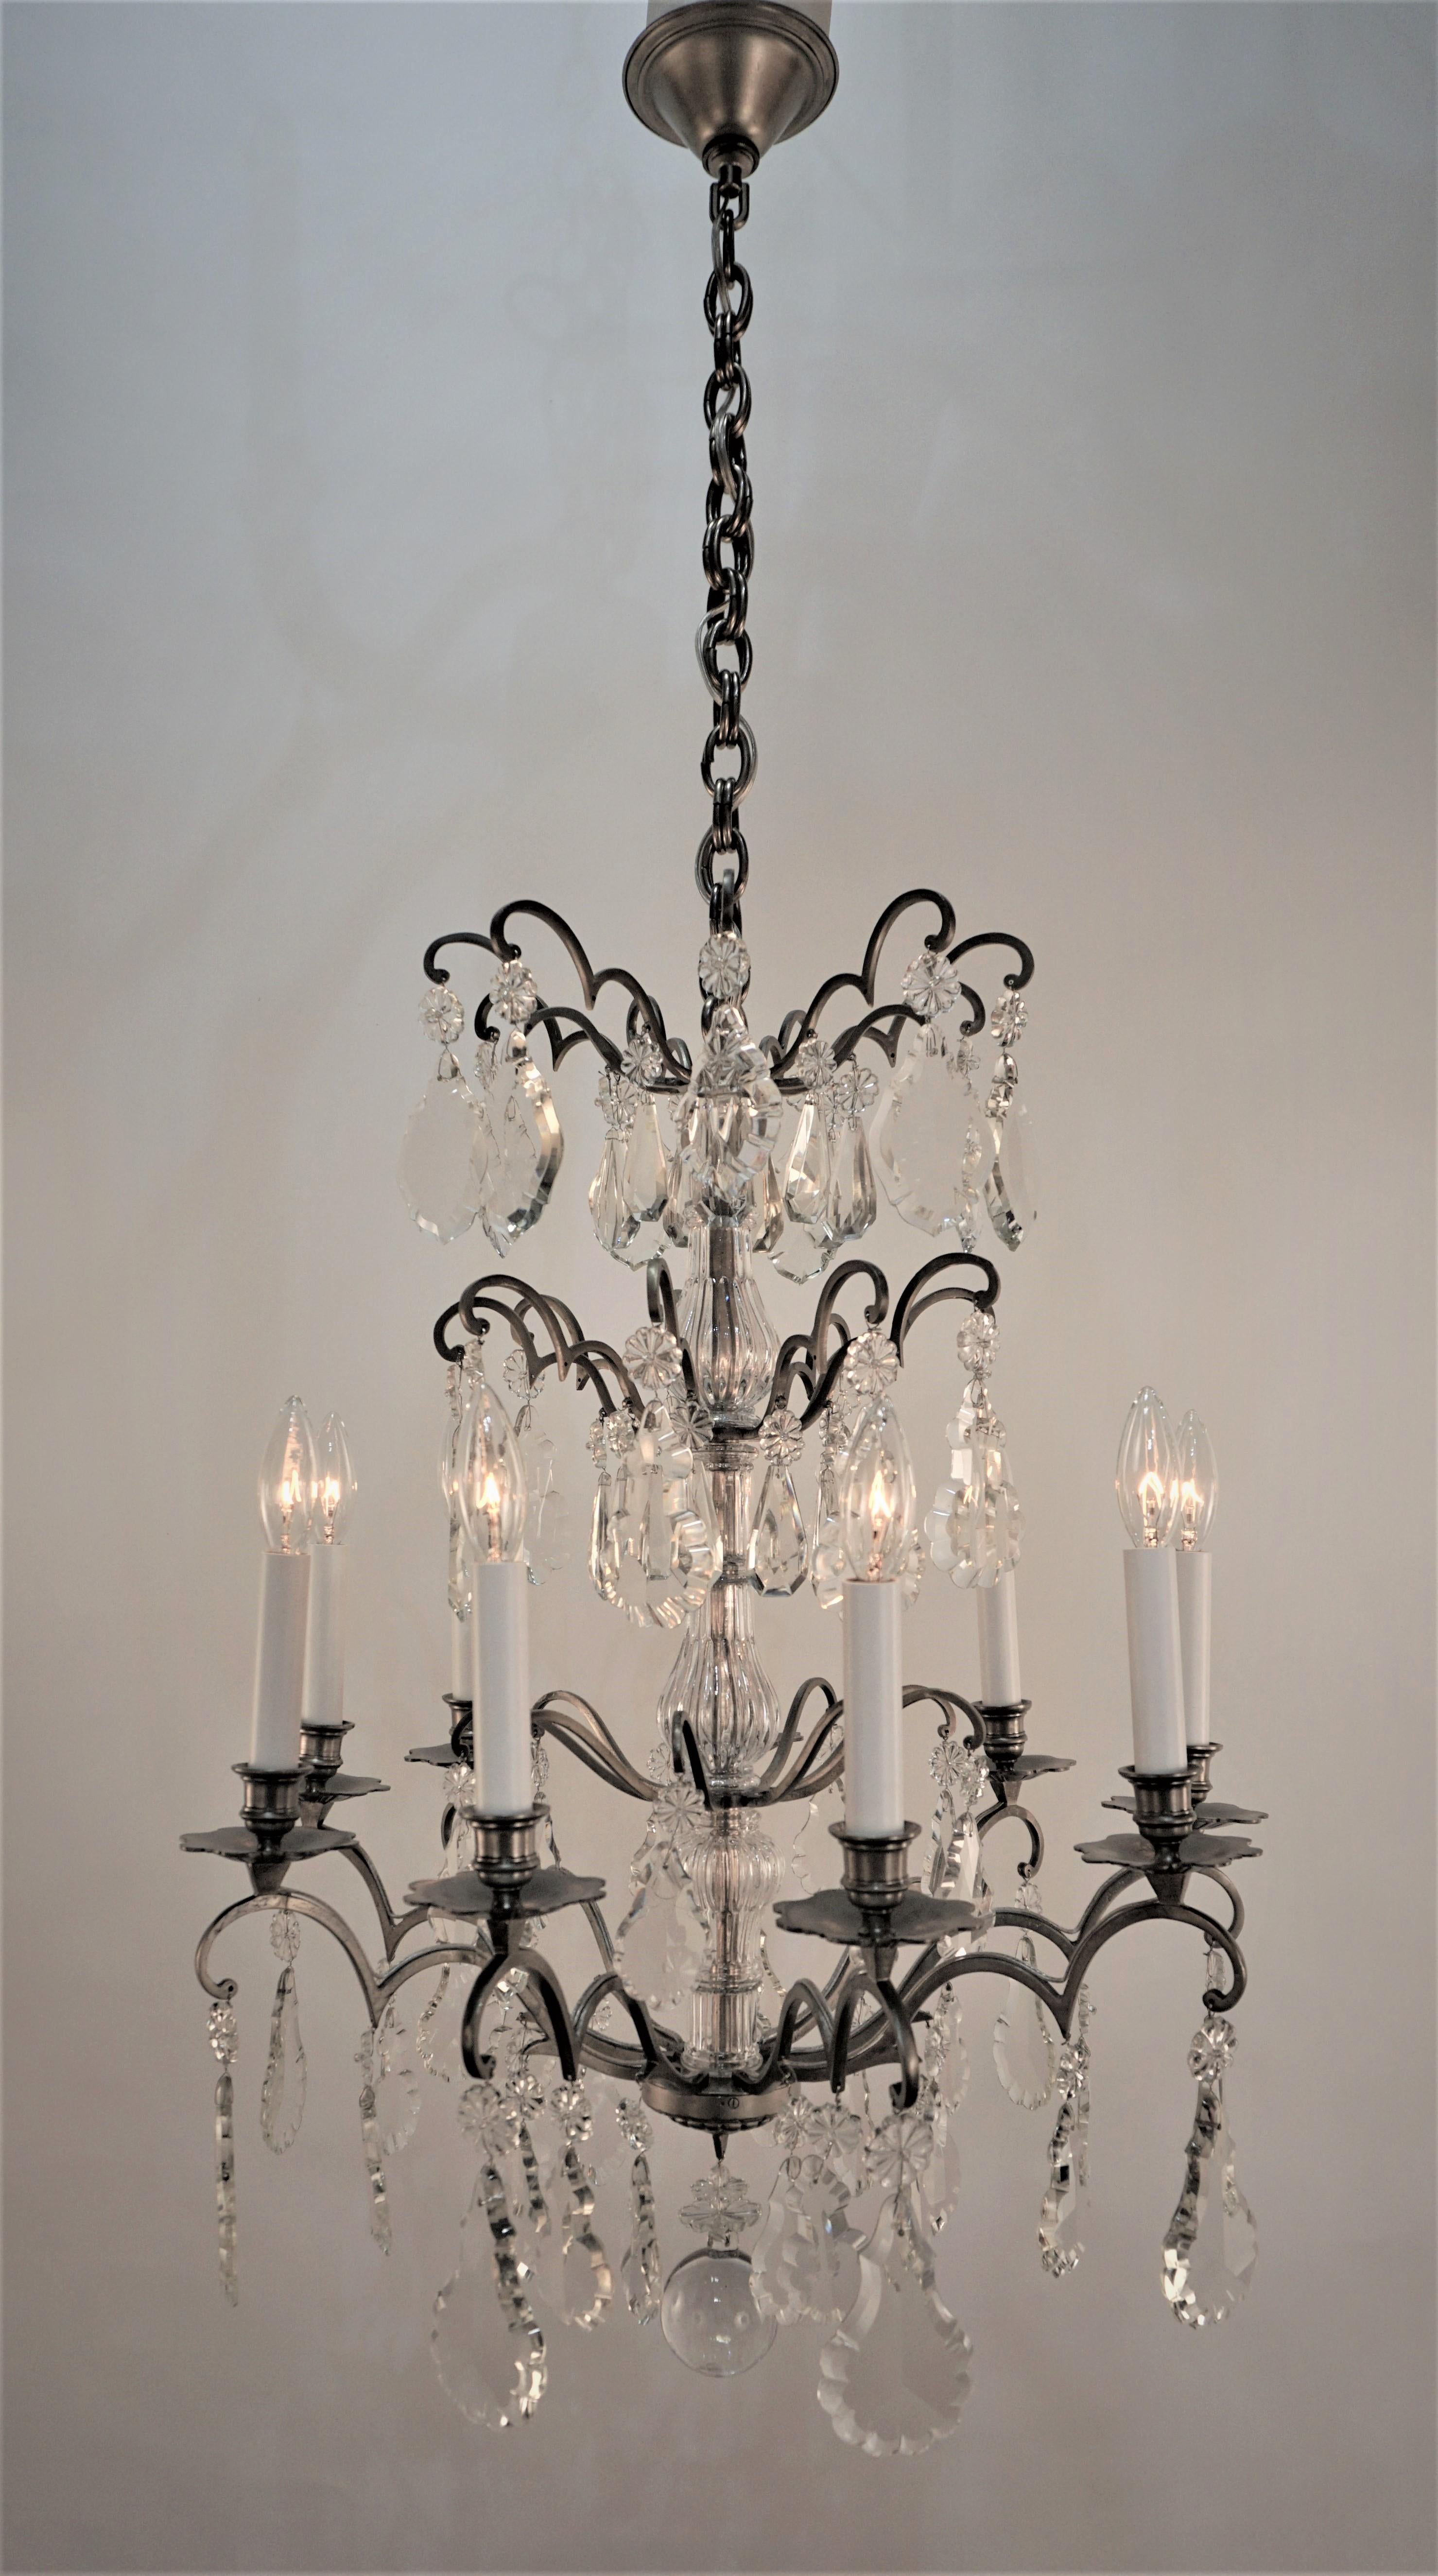 Mid-20th Century French 1930's Crystal Chandelier For Sale